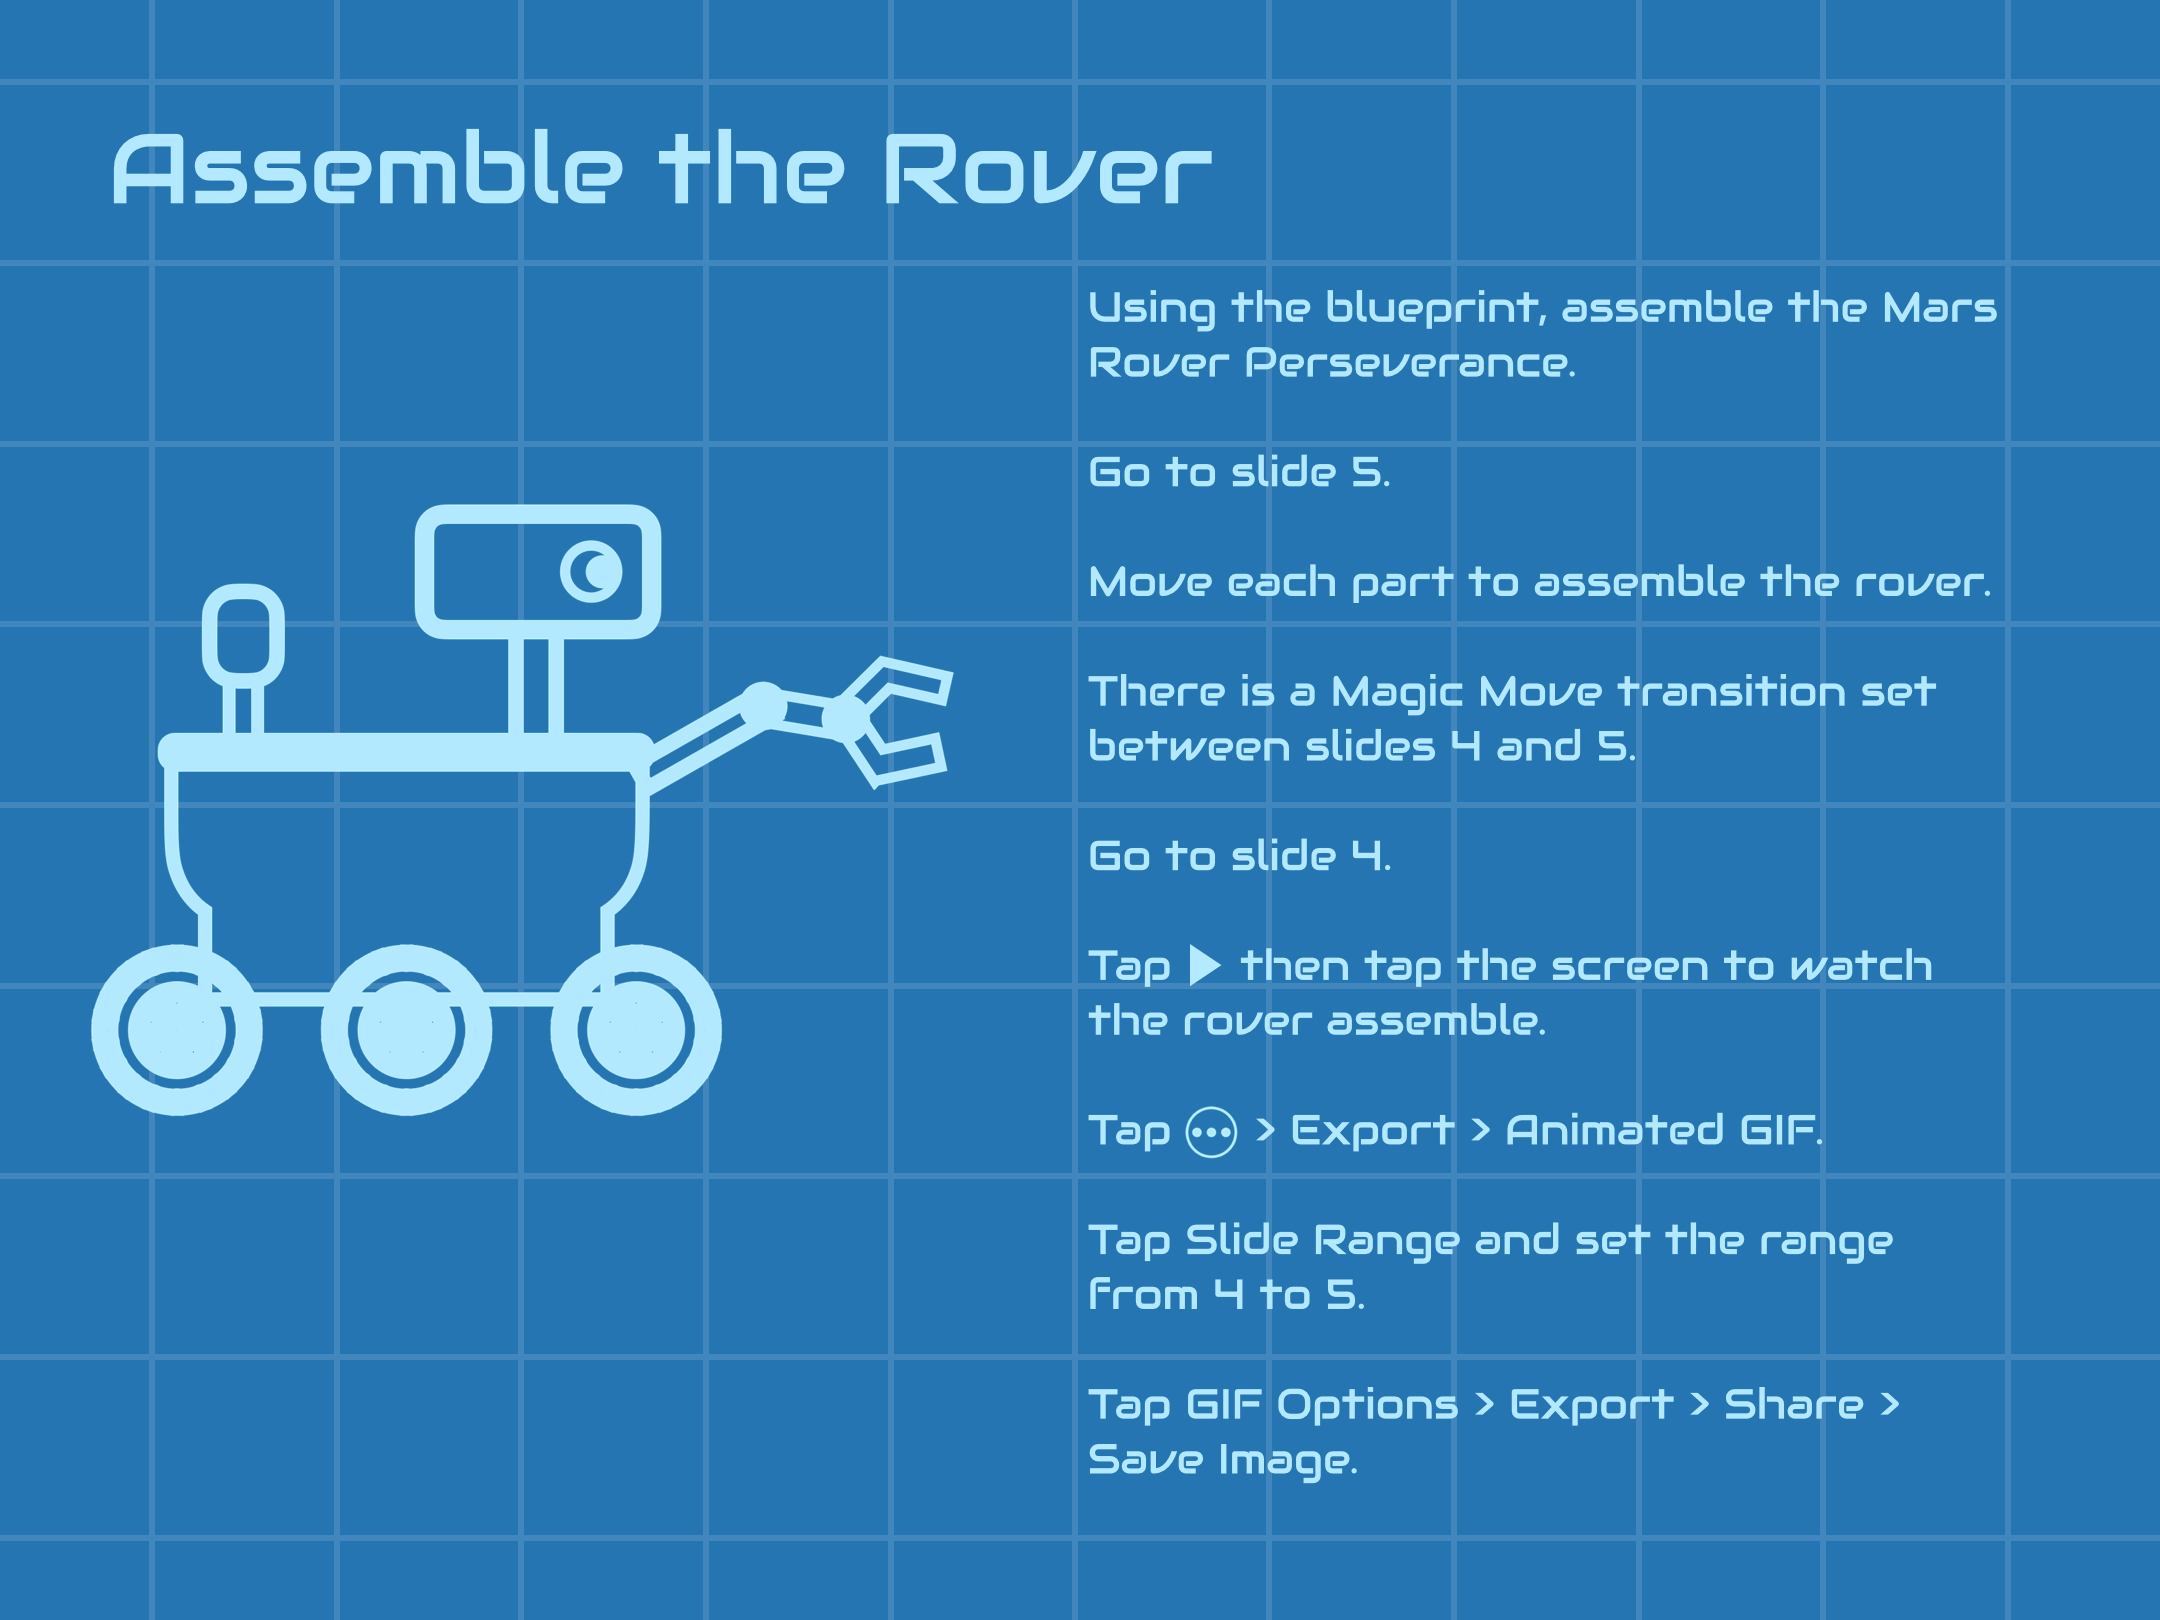 Instructional page from Perseverance Mars Rover - Keynote Activities for iPad. Activity titled ‘Assemble the Rover’.